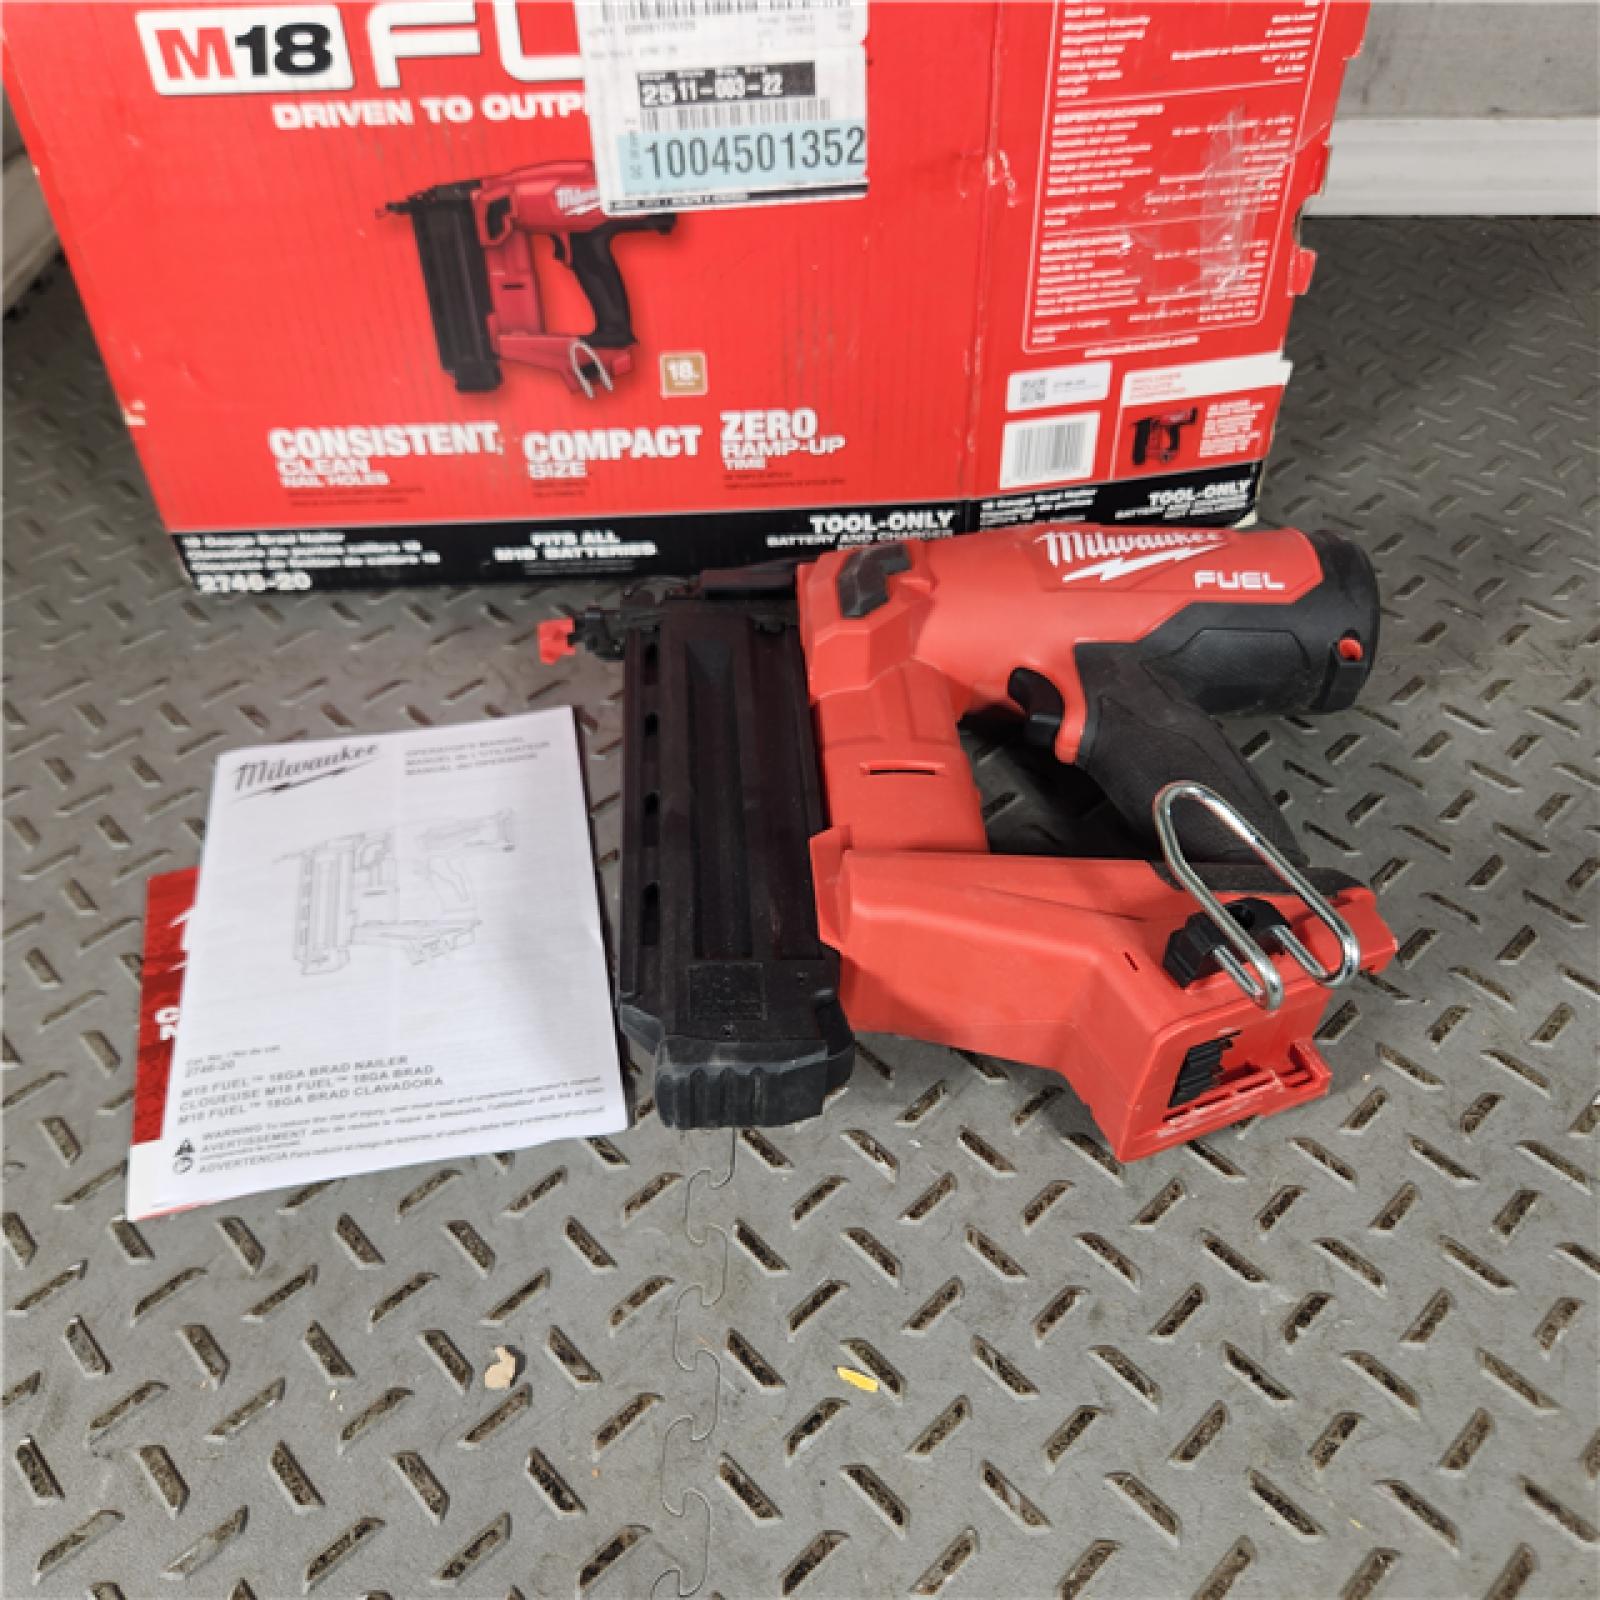 Houston Location - AS-IS Milwaukee M18 Fuel 18V Brushless 18-Gauge Brad Nailer 2746-20 (Bare Tool) - Appears IN USED Condition